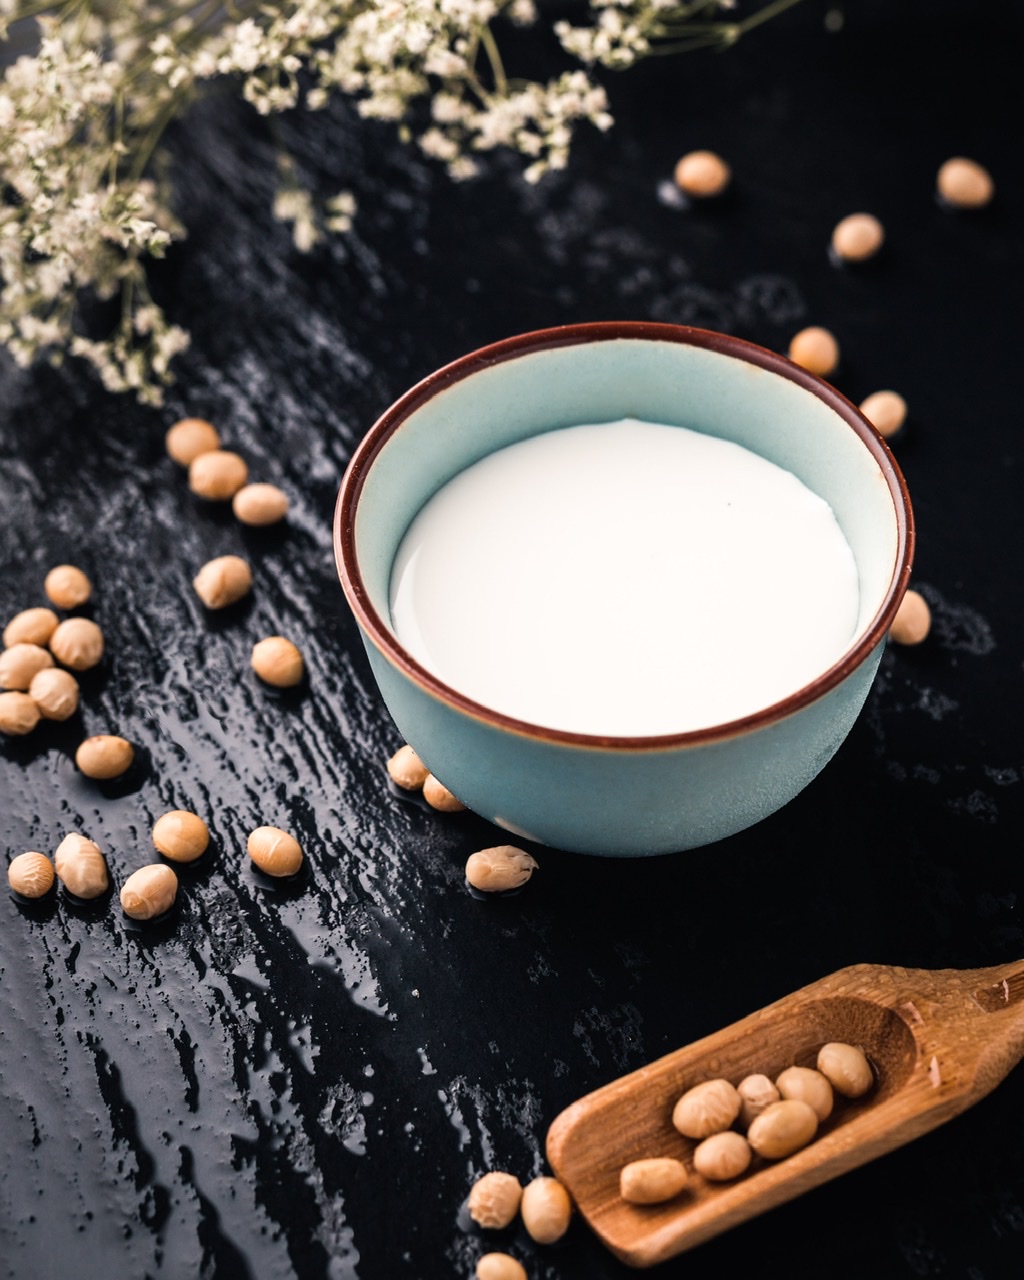 Soy milk contains all the essential amino acids, but soy is also one of the 8 common allergens that people may be intolerant or sensitive to as well.